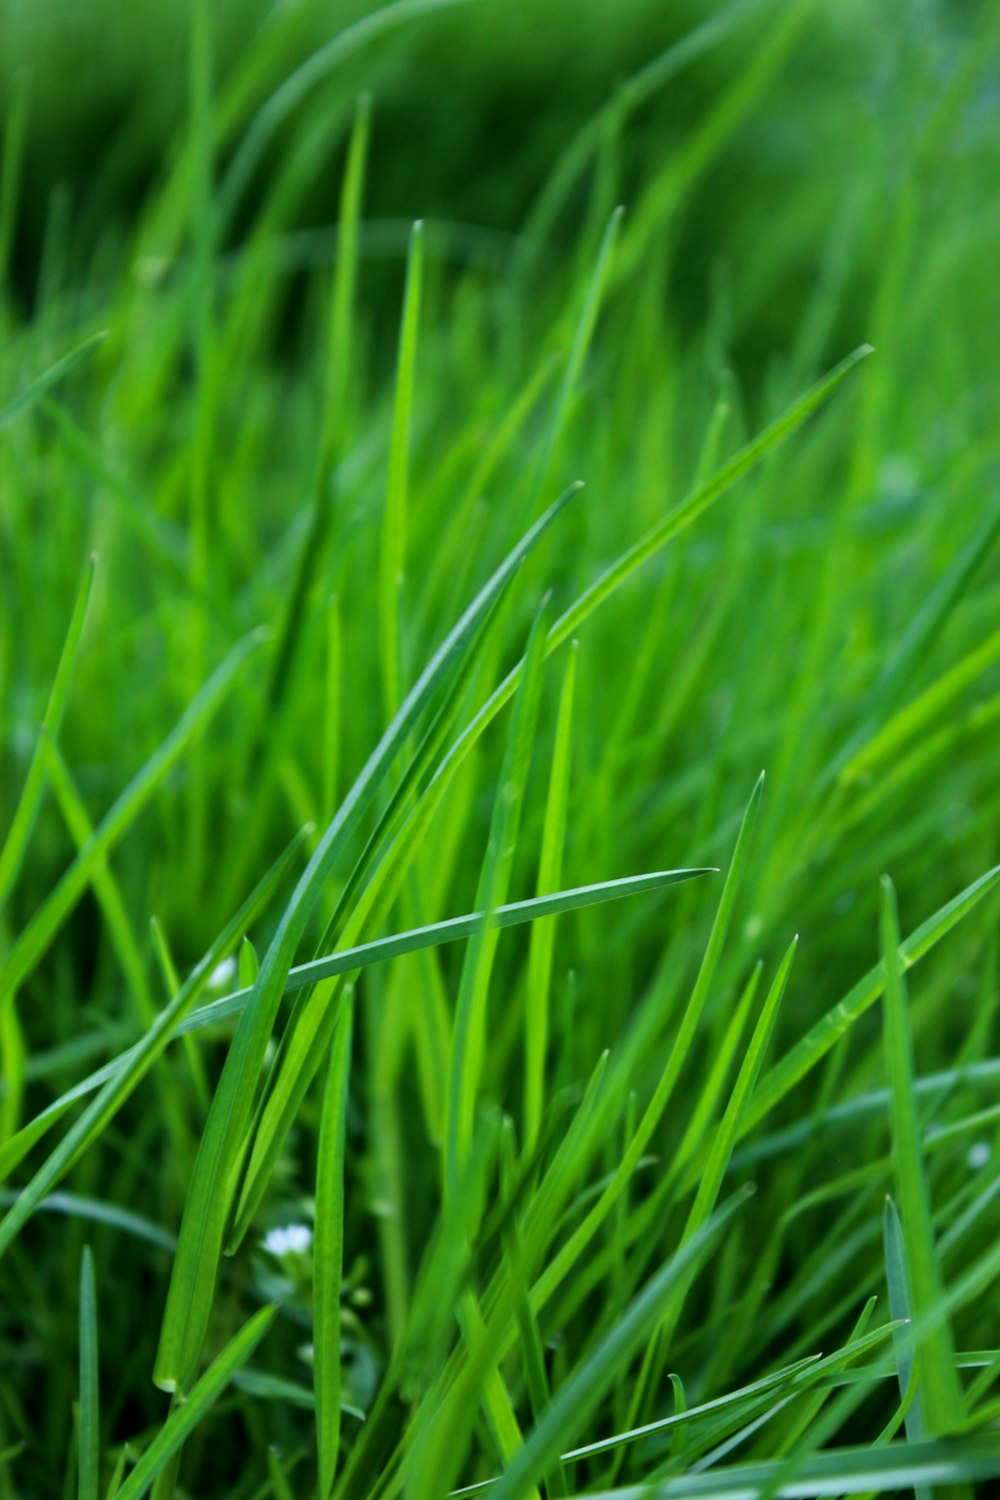 a close up of some green grass with water droplets